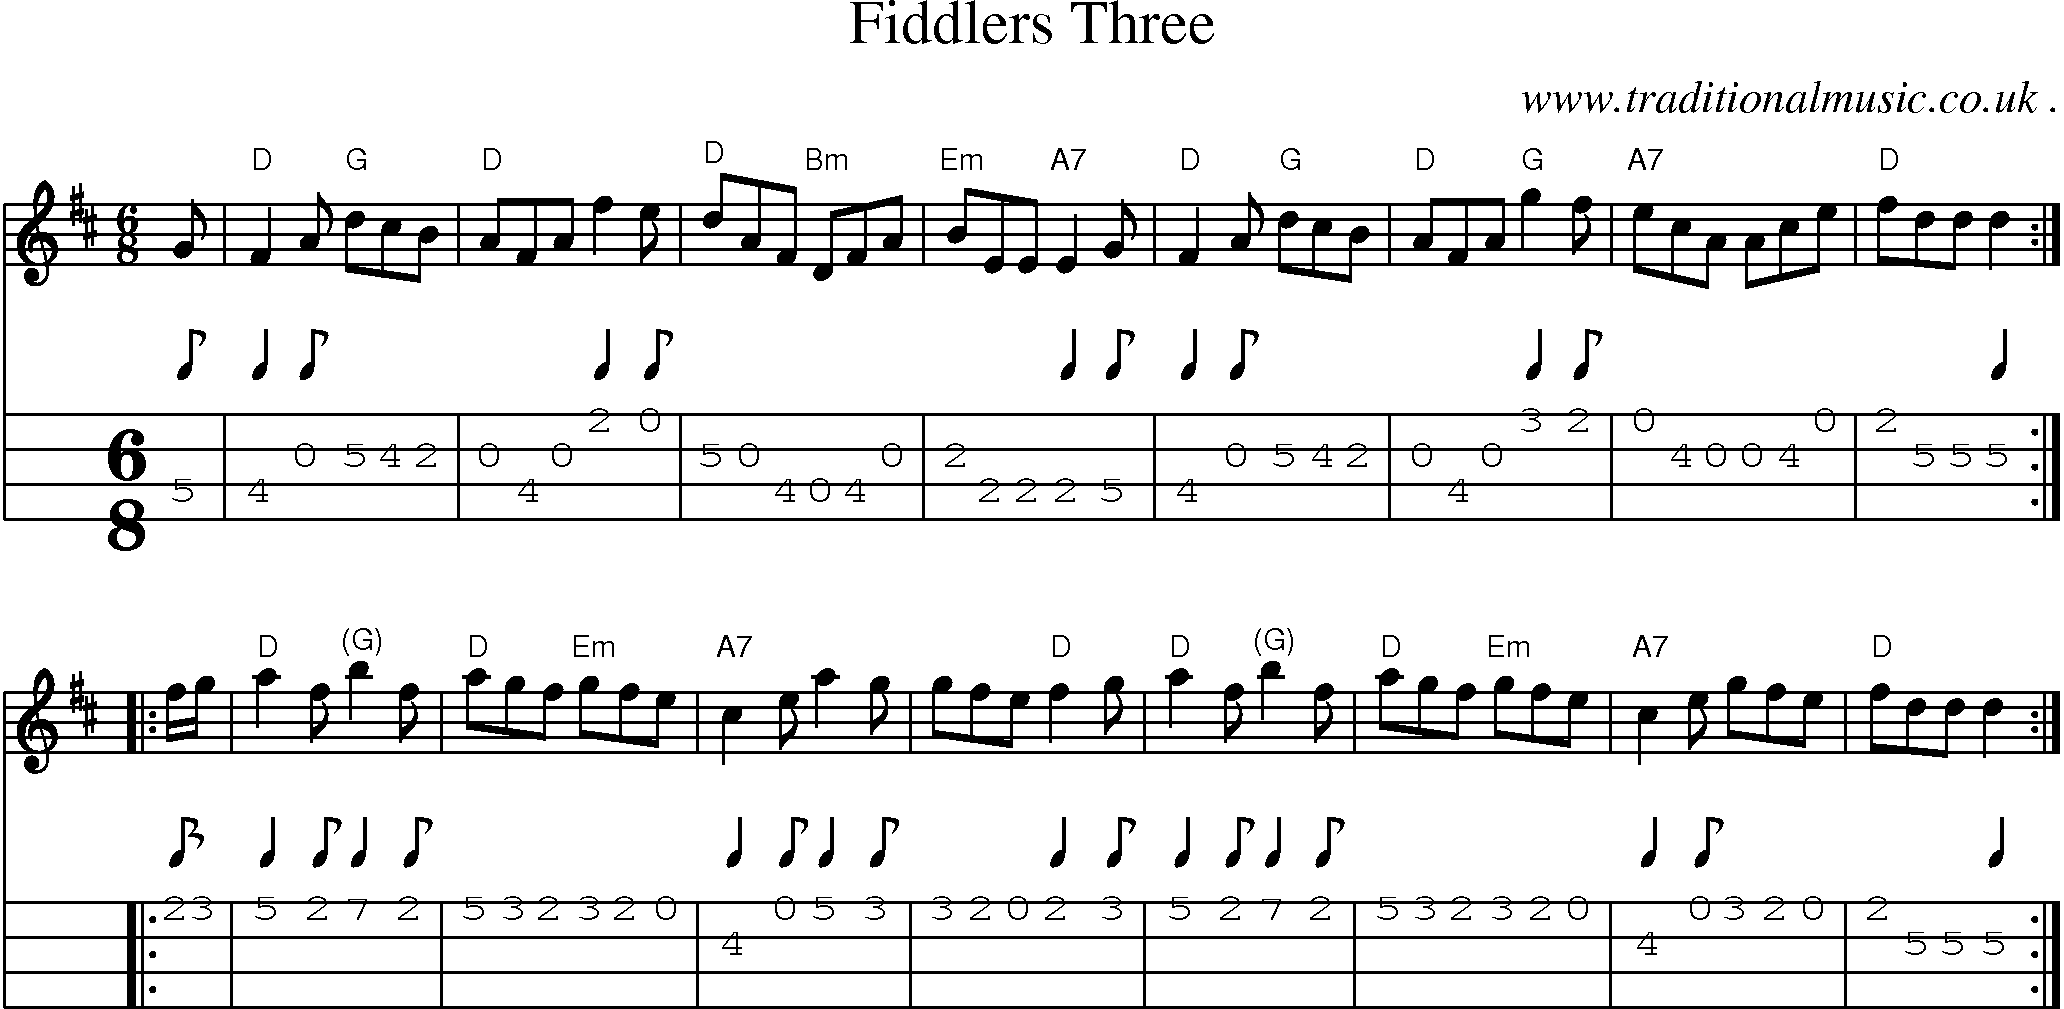 Sheet-music  score, Chords and Mandolin Tabs for Fiddlers Three